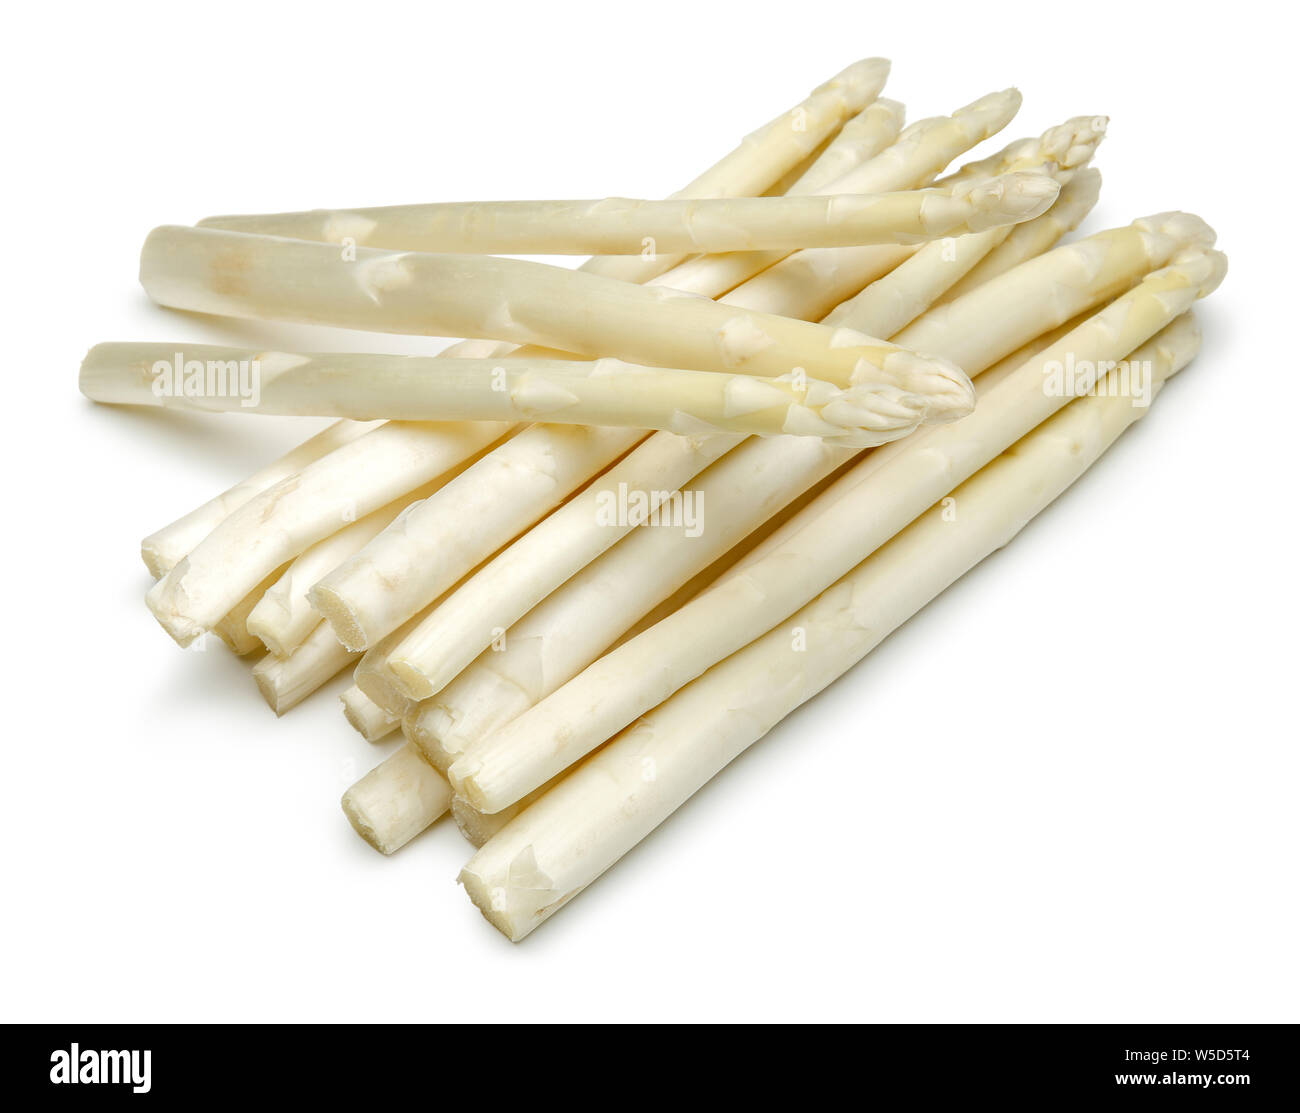 Bunch of white asparagus isolated on white background Stock Photo